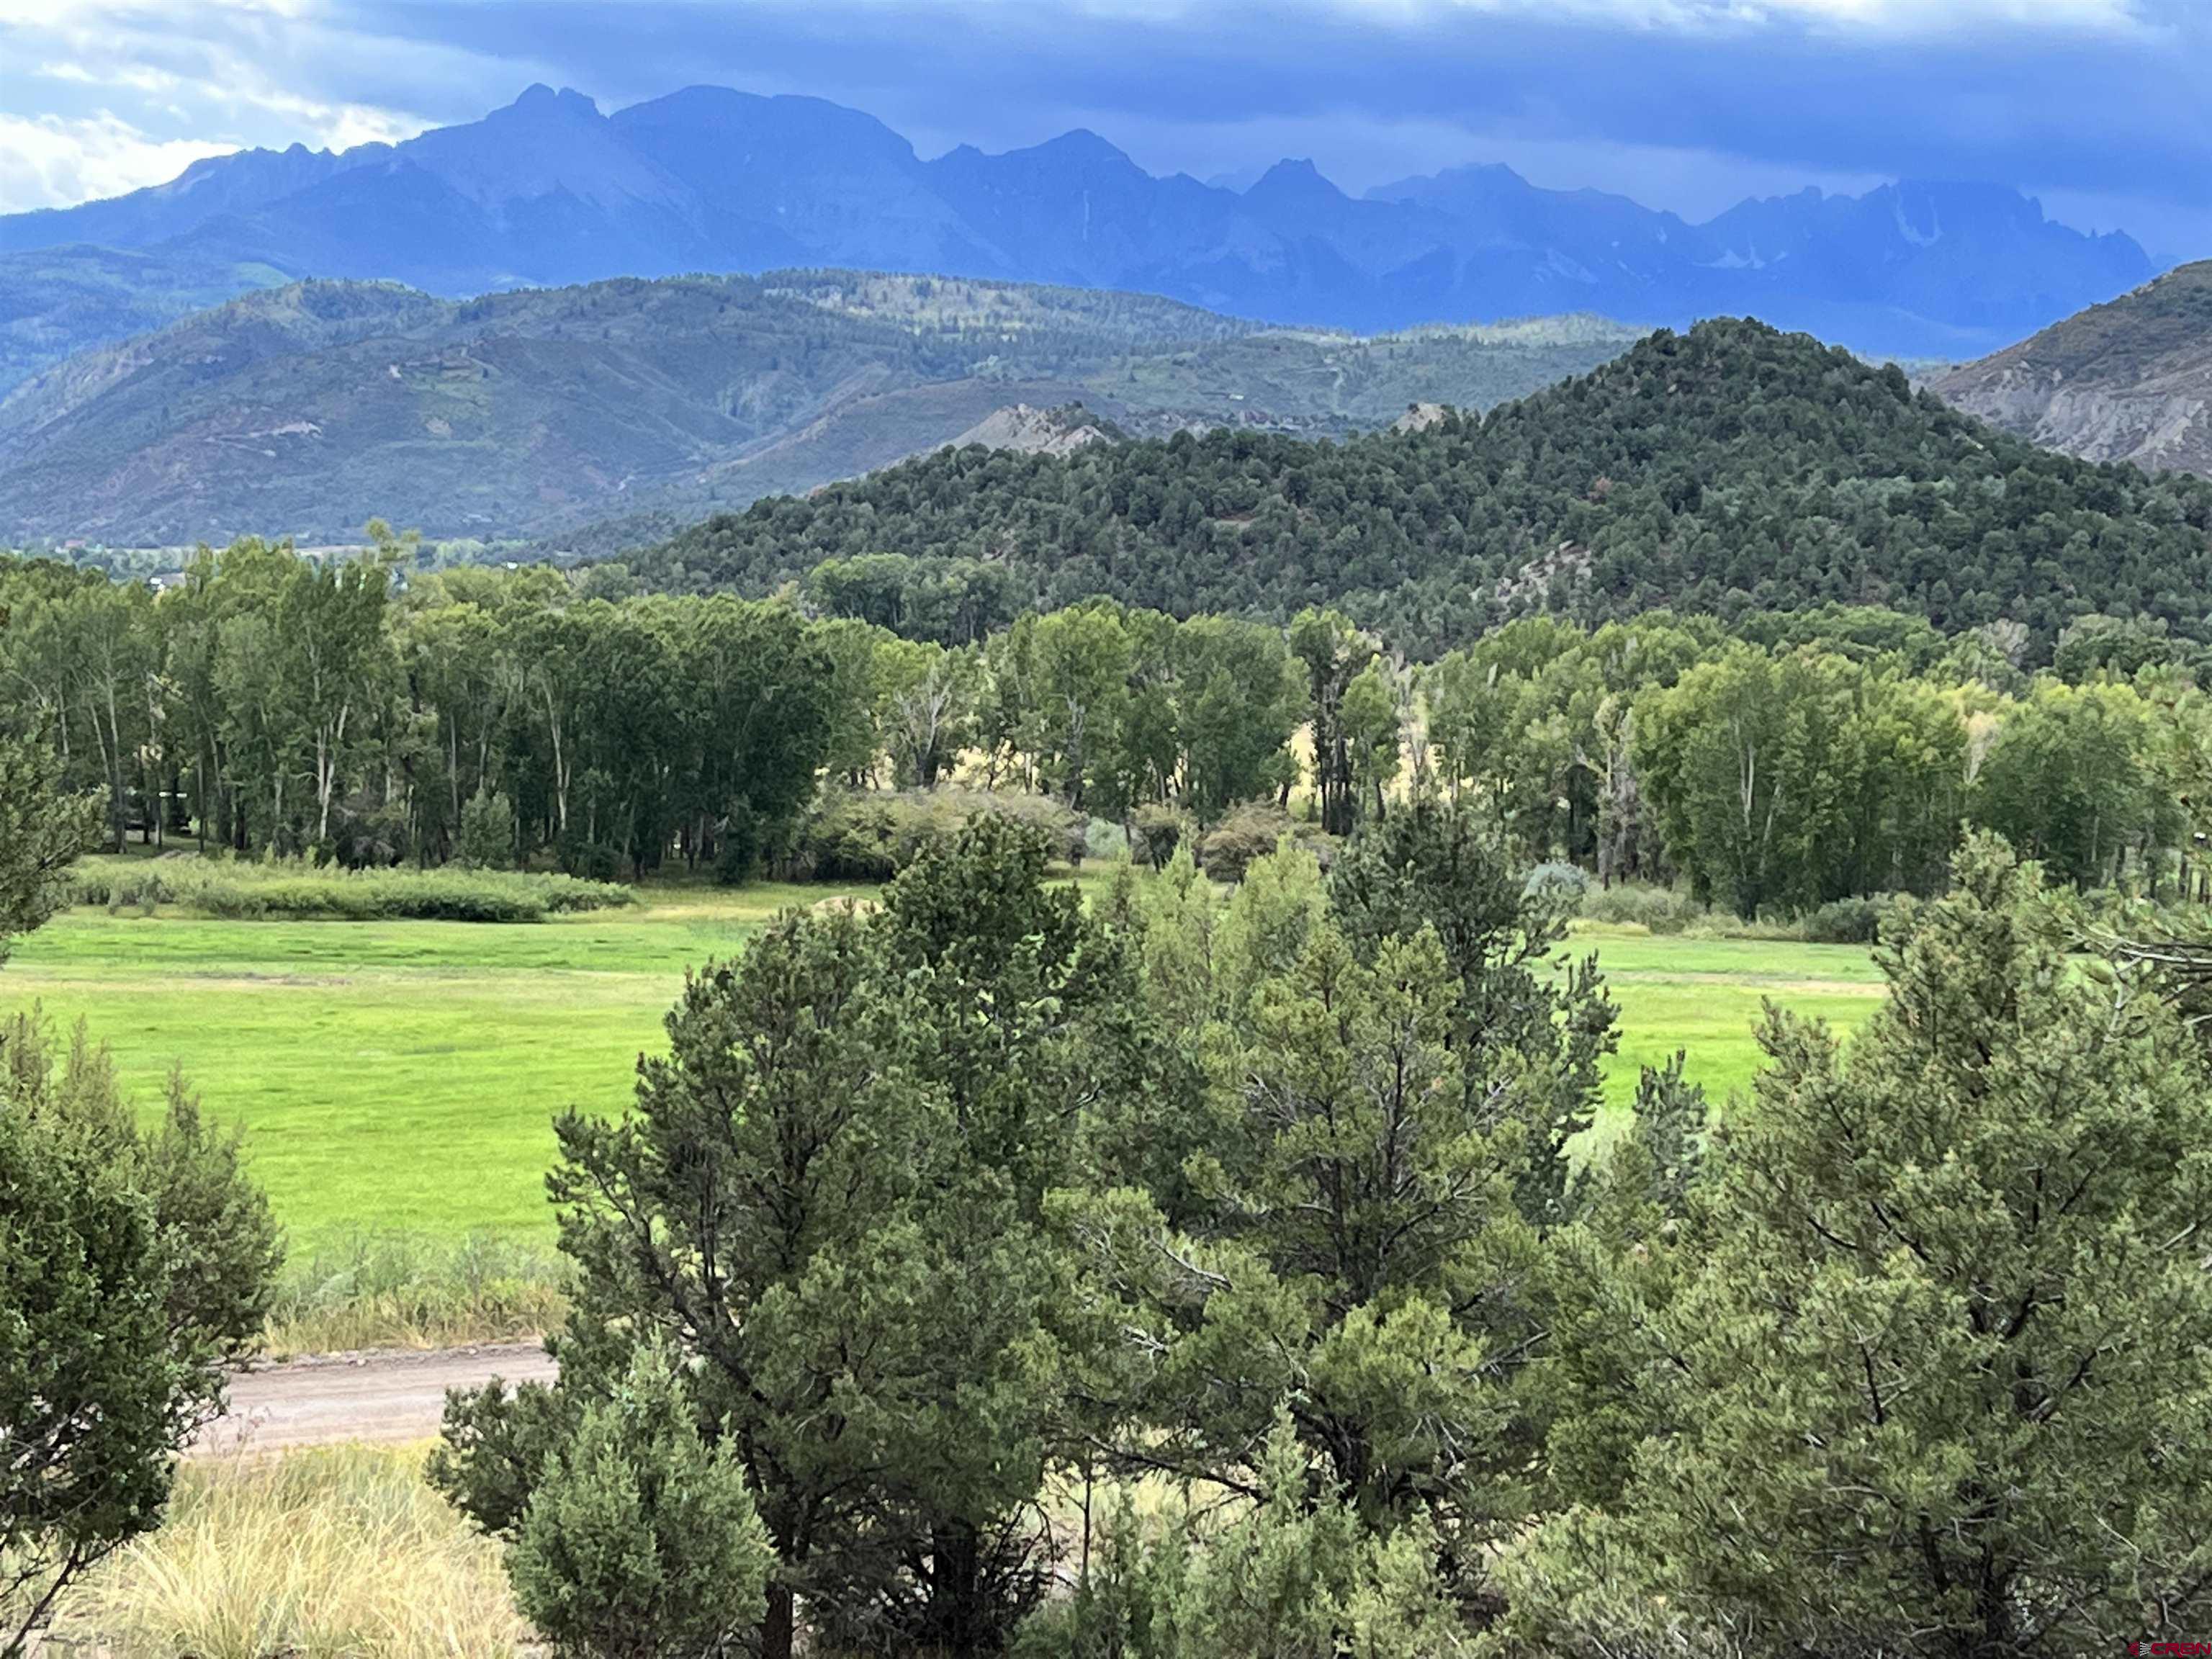 This lot provides striking, unobstructed views of the San Juan Range, including Mt. Sneffles, the Cimmarron Range, and the Ouray Valley of Mt. Abrams.  The lot has  a Tri-County Water Tap, a natural gas connection at the lot line, power to the lot line, and a fire hydrant at the lot corner. You will have ample space to construct your ideal home with a walk-out basement and accommodate all of your toys, animals and more!  This property is conveniently located near Ridgway State Park, downtown Ridgway, Ouray, Telluride, and major shopping in Montrose. Few properties in the area offer such breathtaking views, and the absence of covenants allows you to build your dream in Ridgway.